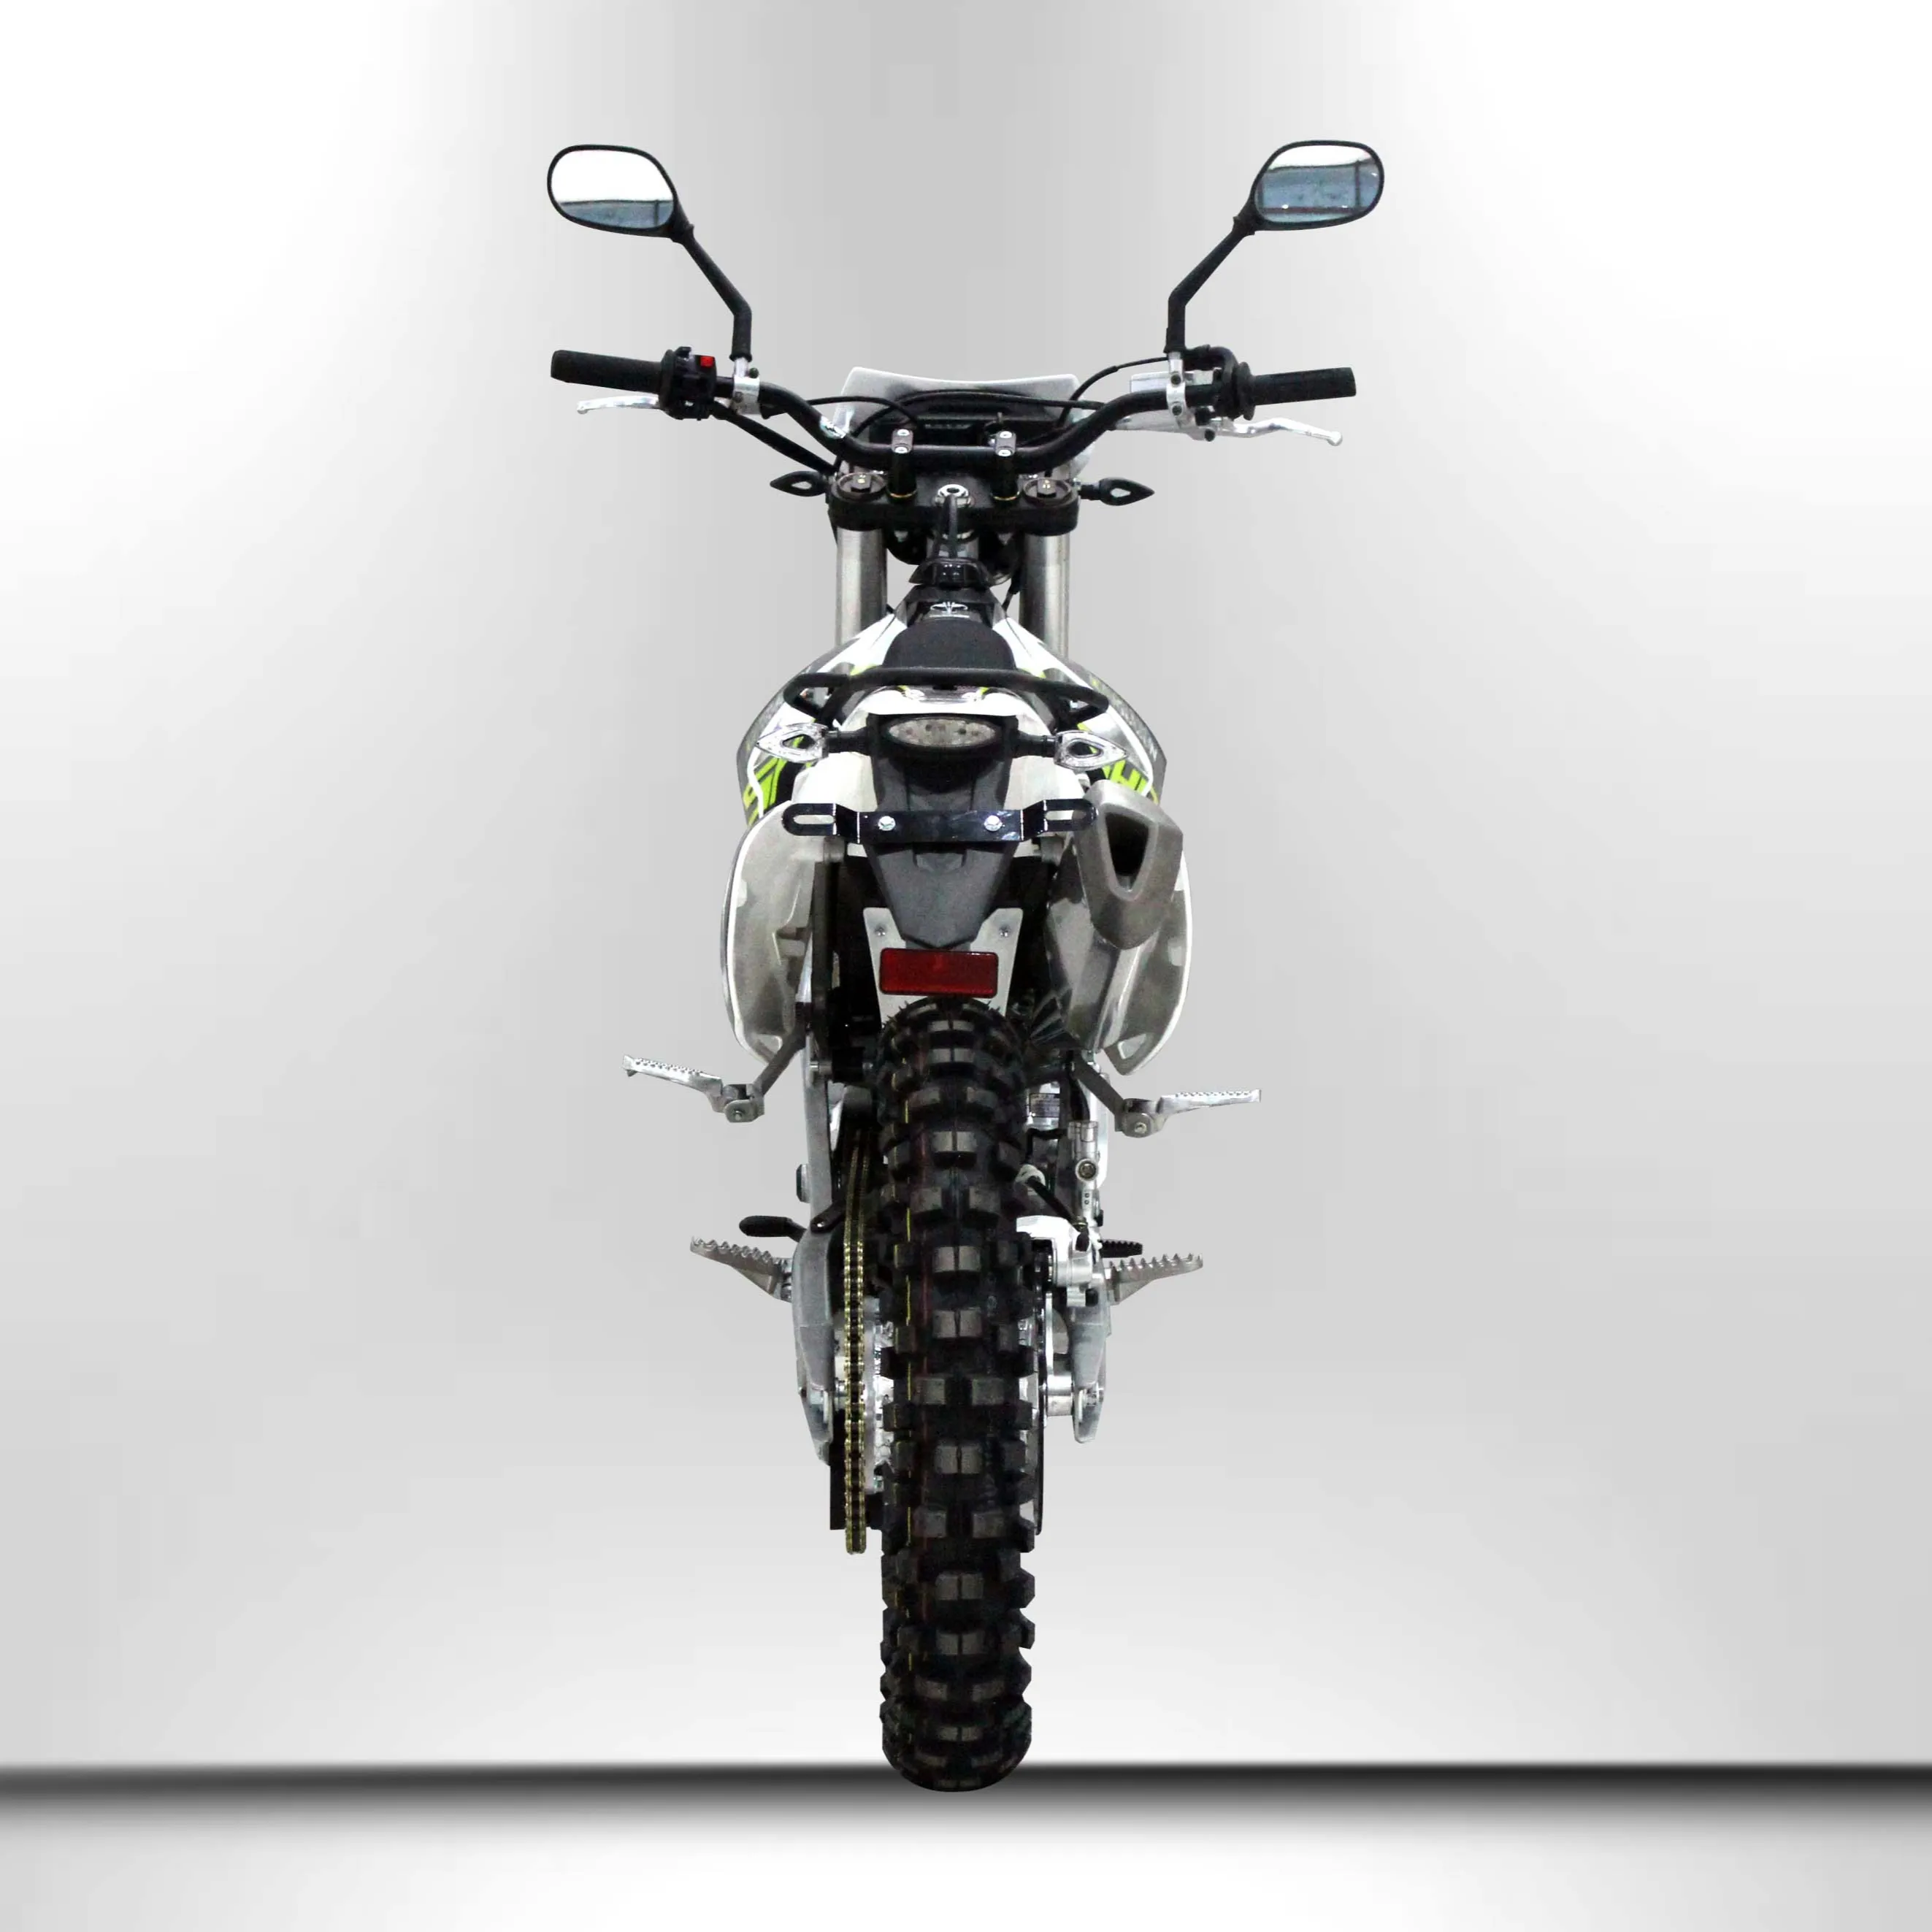 Chinese High Quality Cheap for Sale 250cc Enduro Off-road Dirt Motorcycle